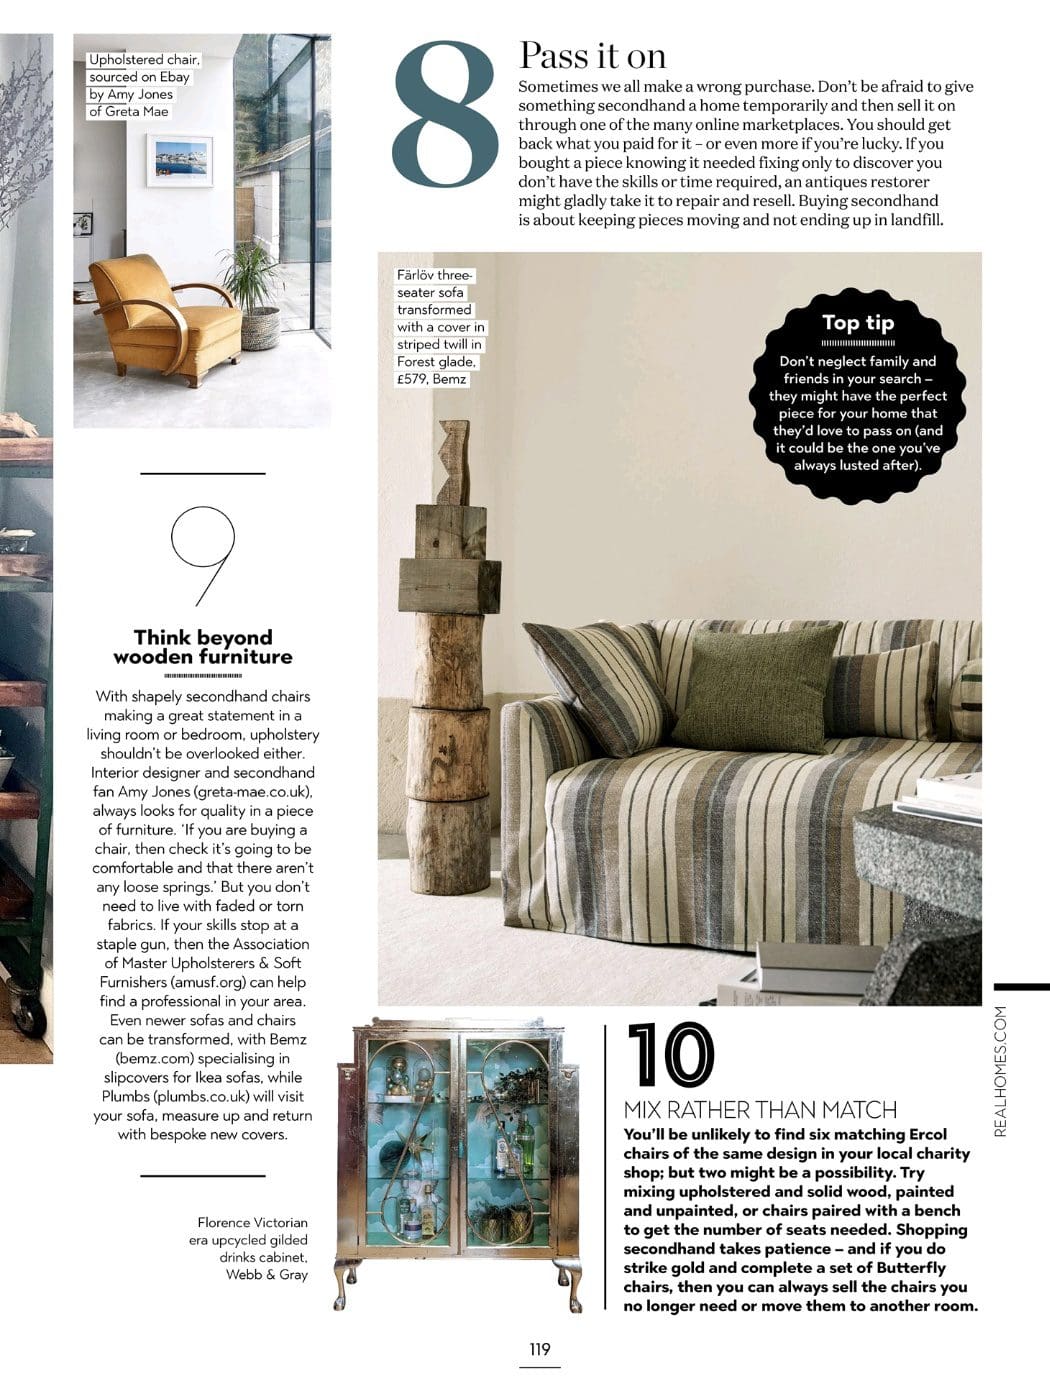 Gold display cabinet in magazine article about buying secondhand furniture